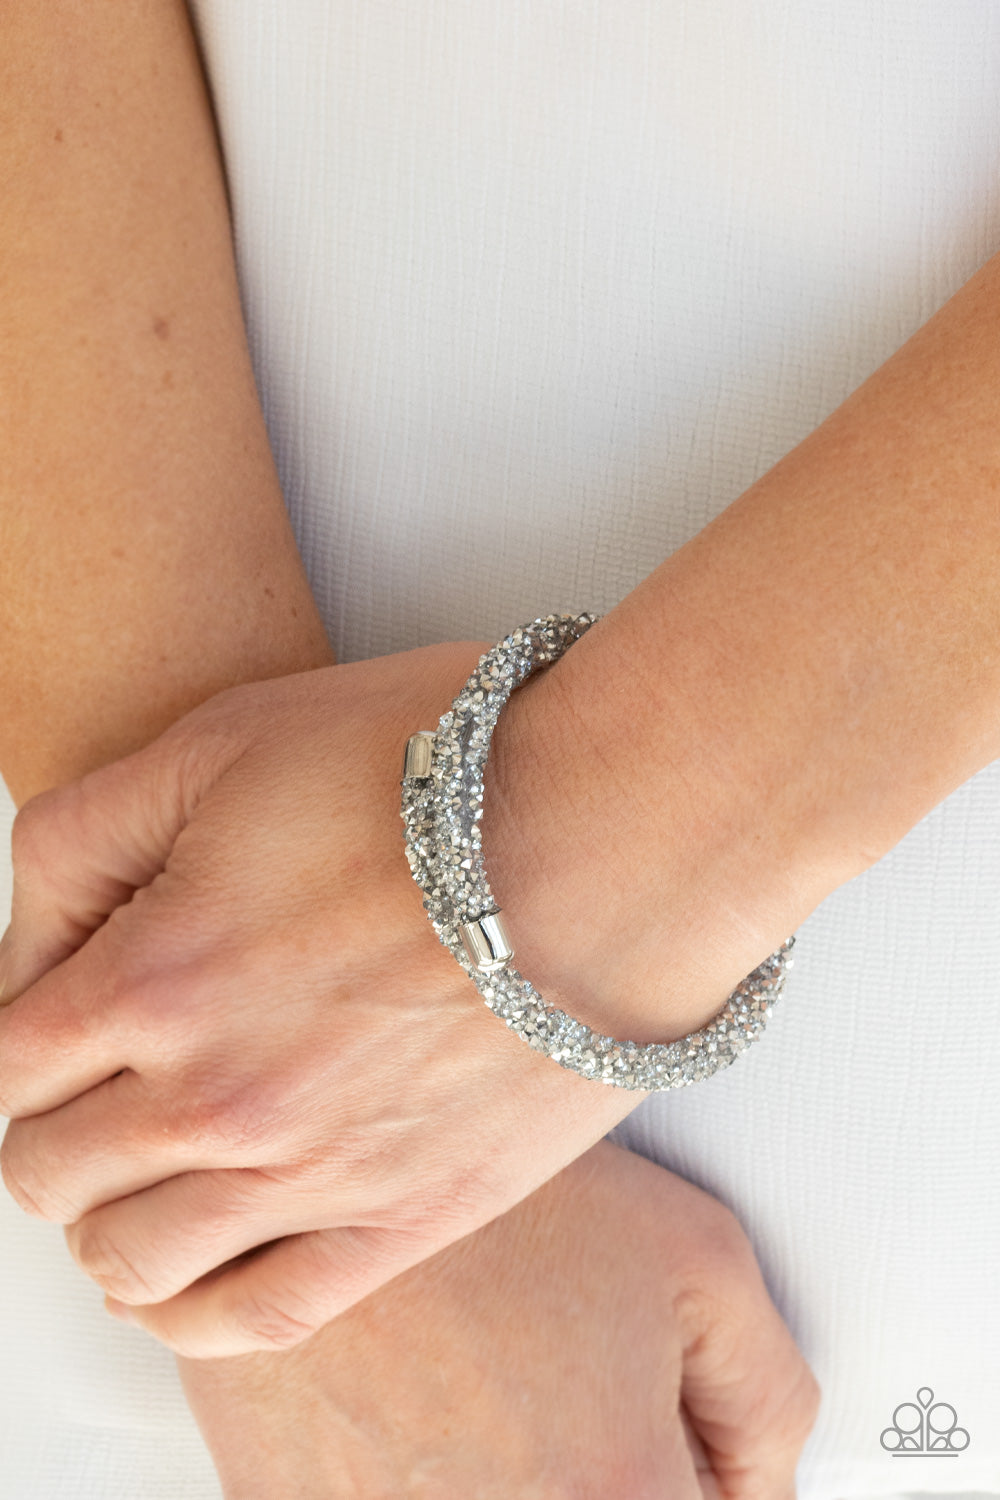 Roll Out The Glitz Silver
Bracelet - Daria's Blings N Things